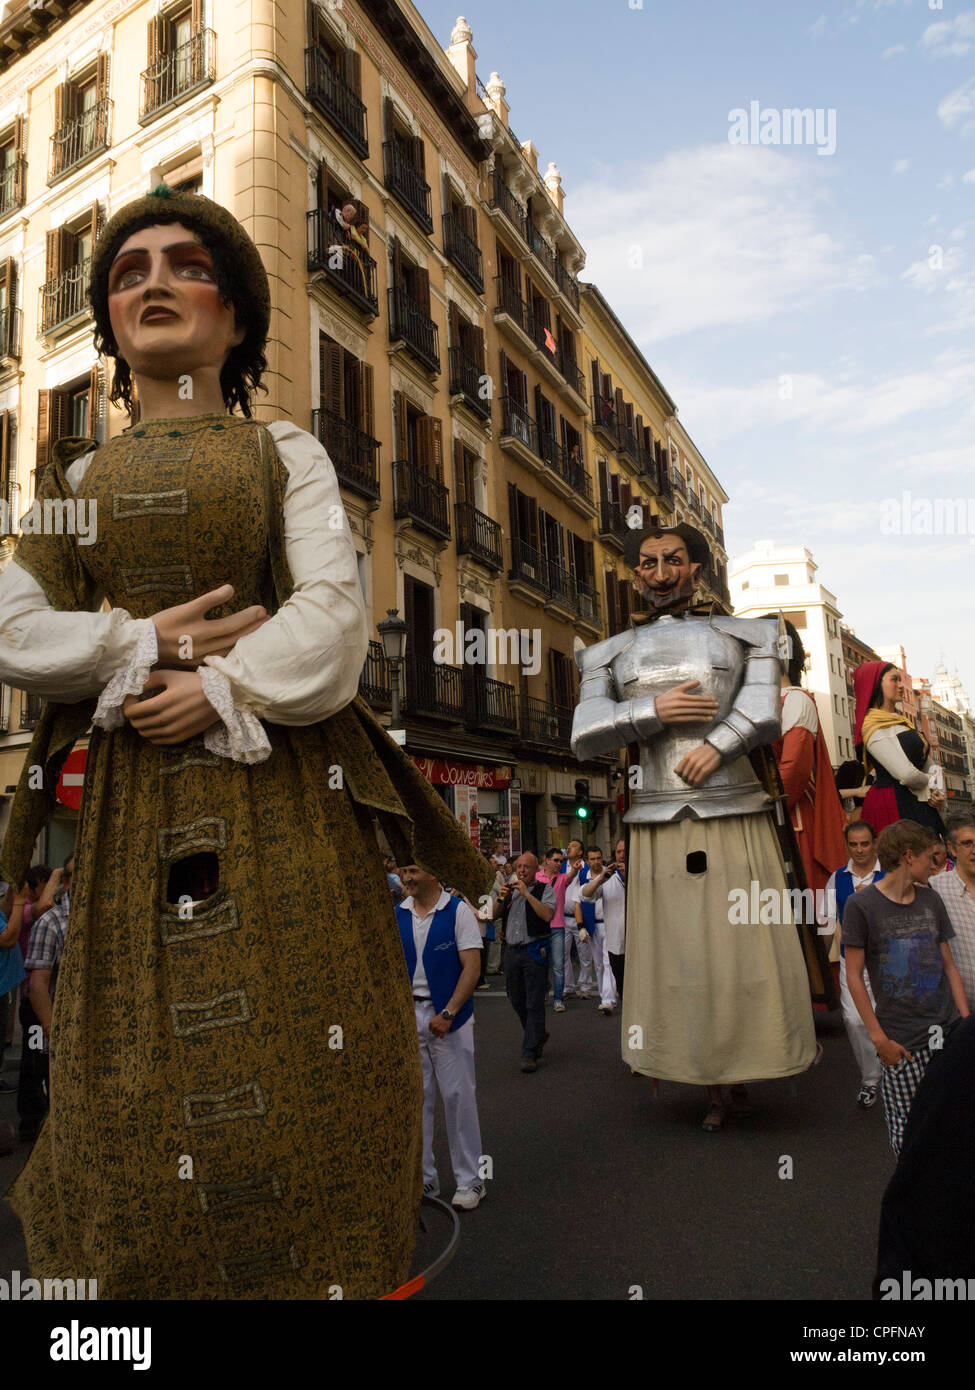 Giants and big-heads (gigantes y cabezudos) puppet parade during the San Isidro festivities in Madrid, Spain, 11 May 2012 Stock Photo